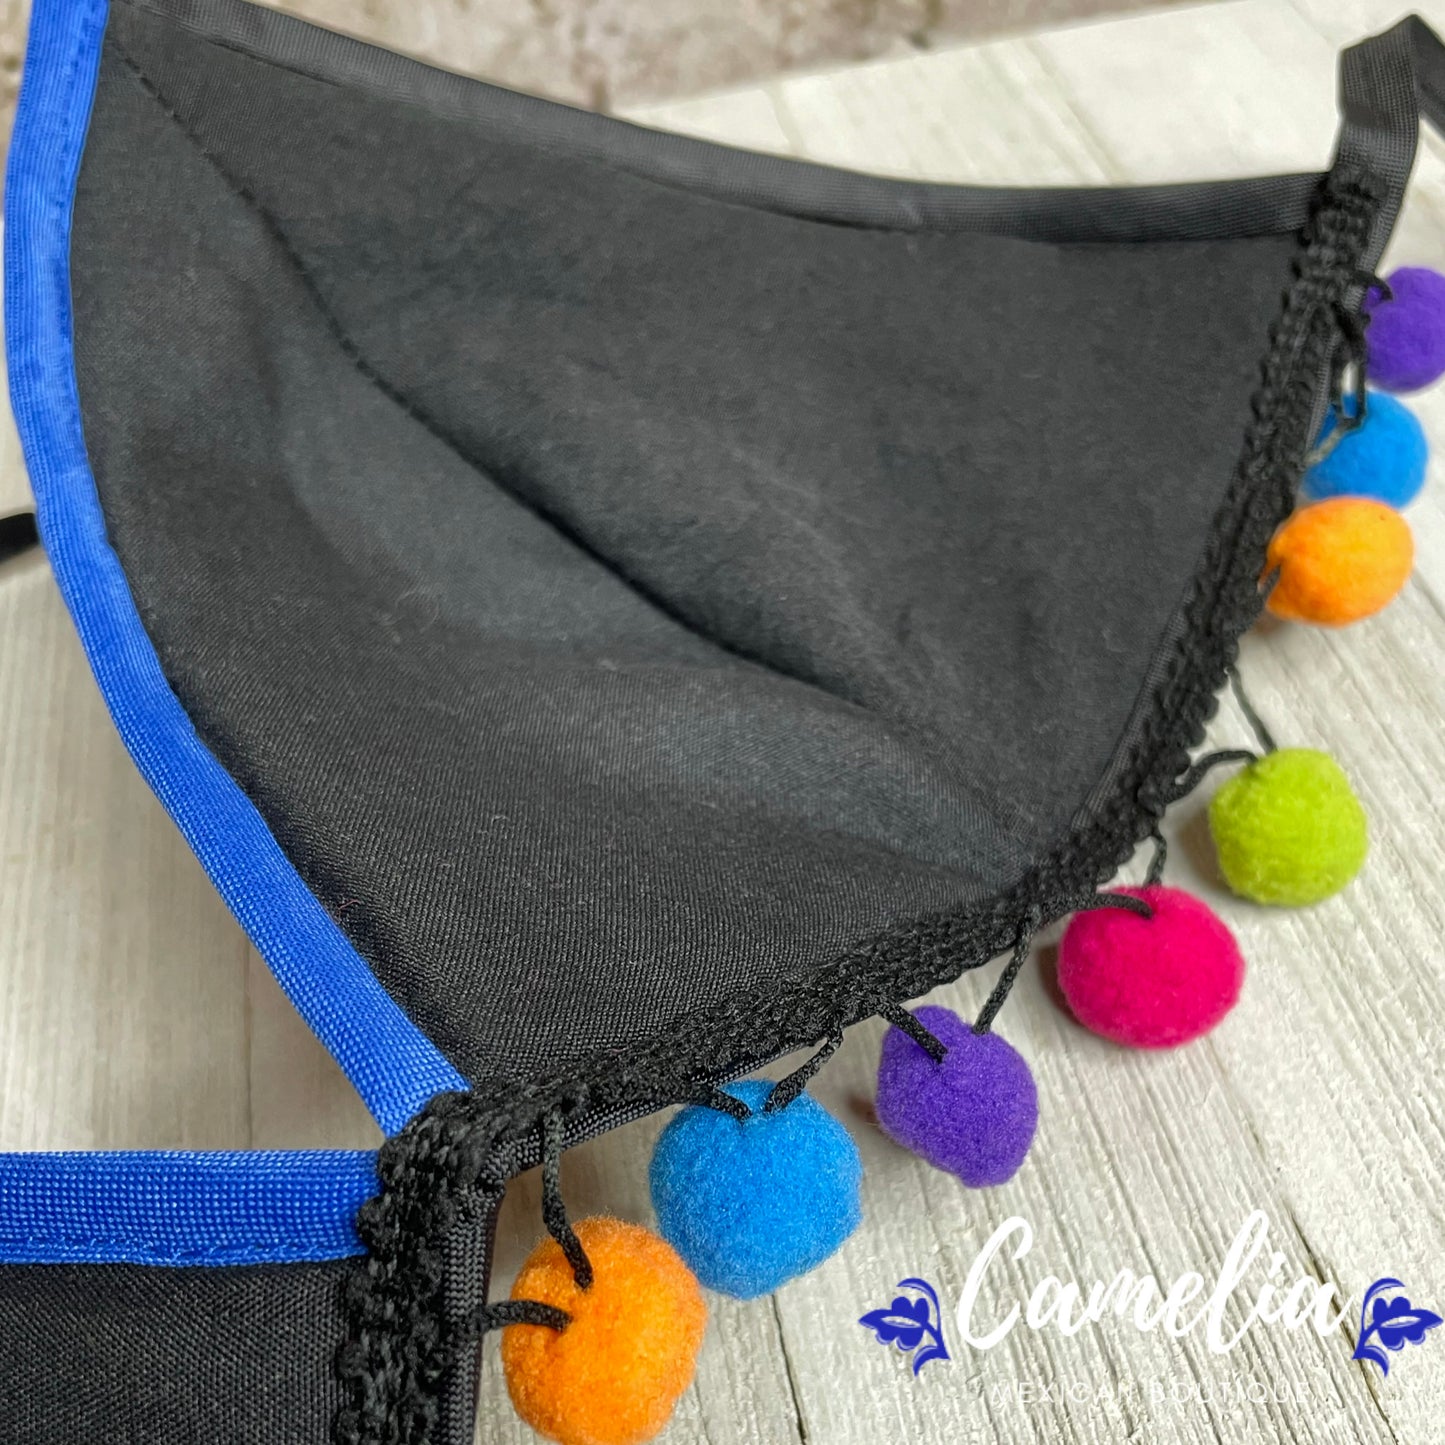 Mexican Embroidered Bikini Top with Poms - ZINNIA